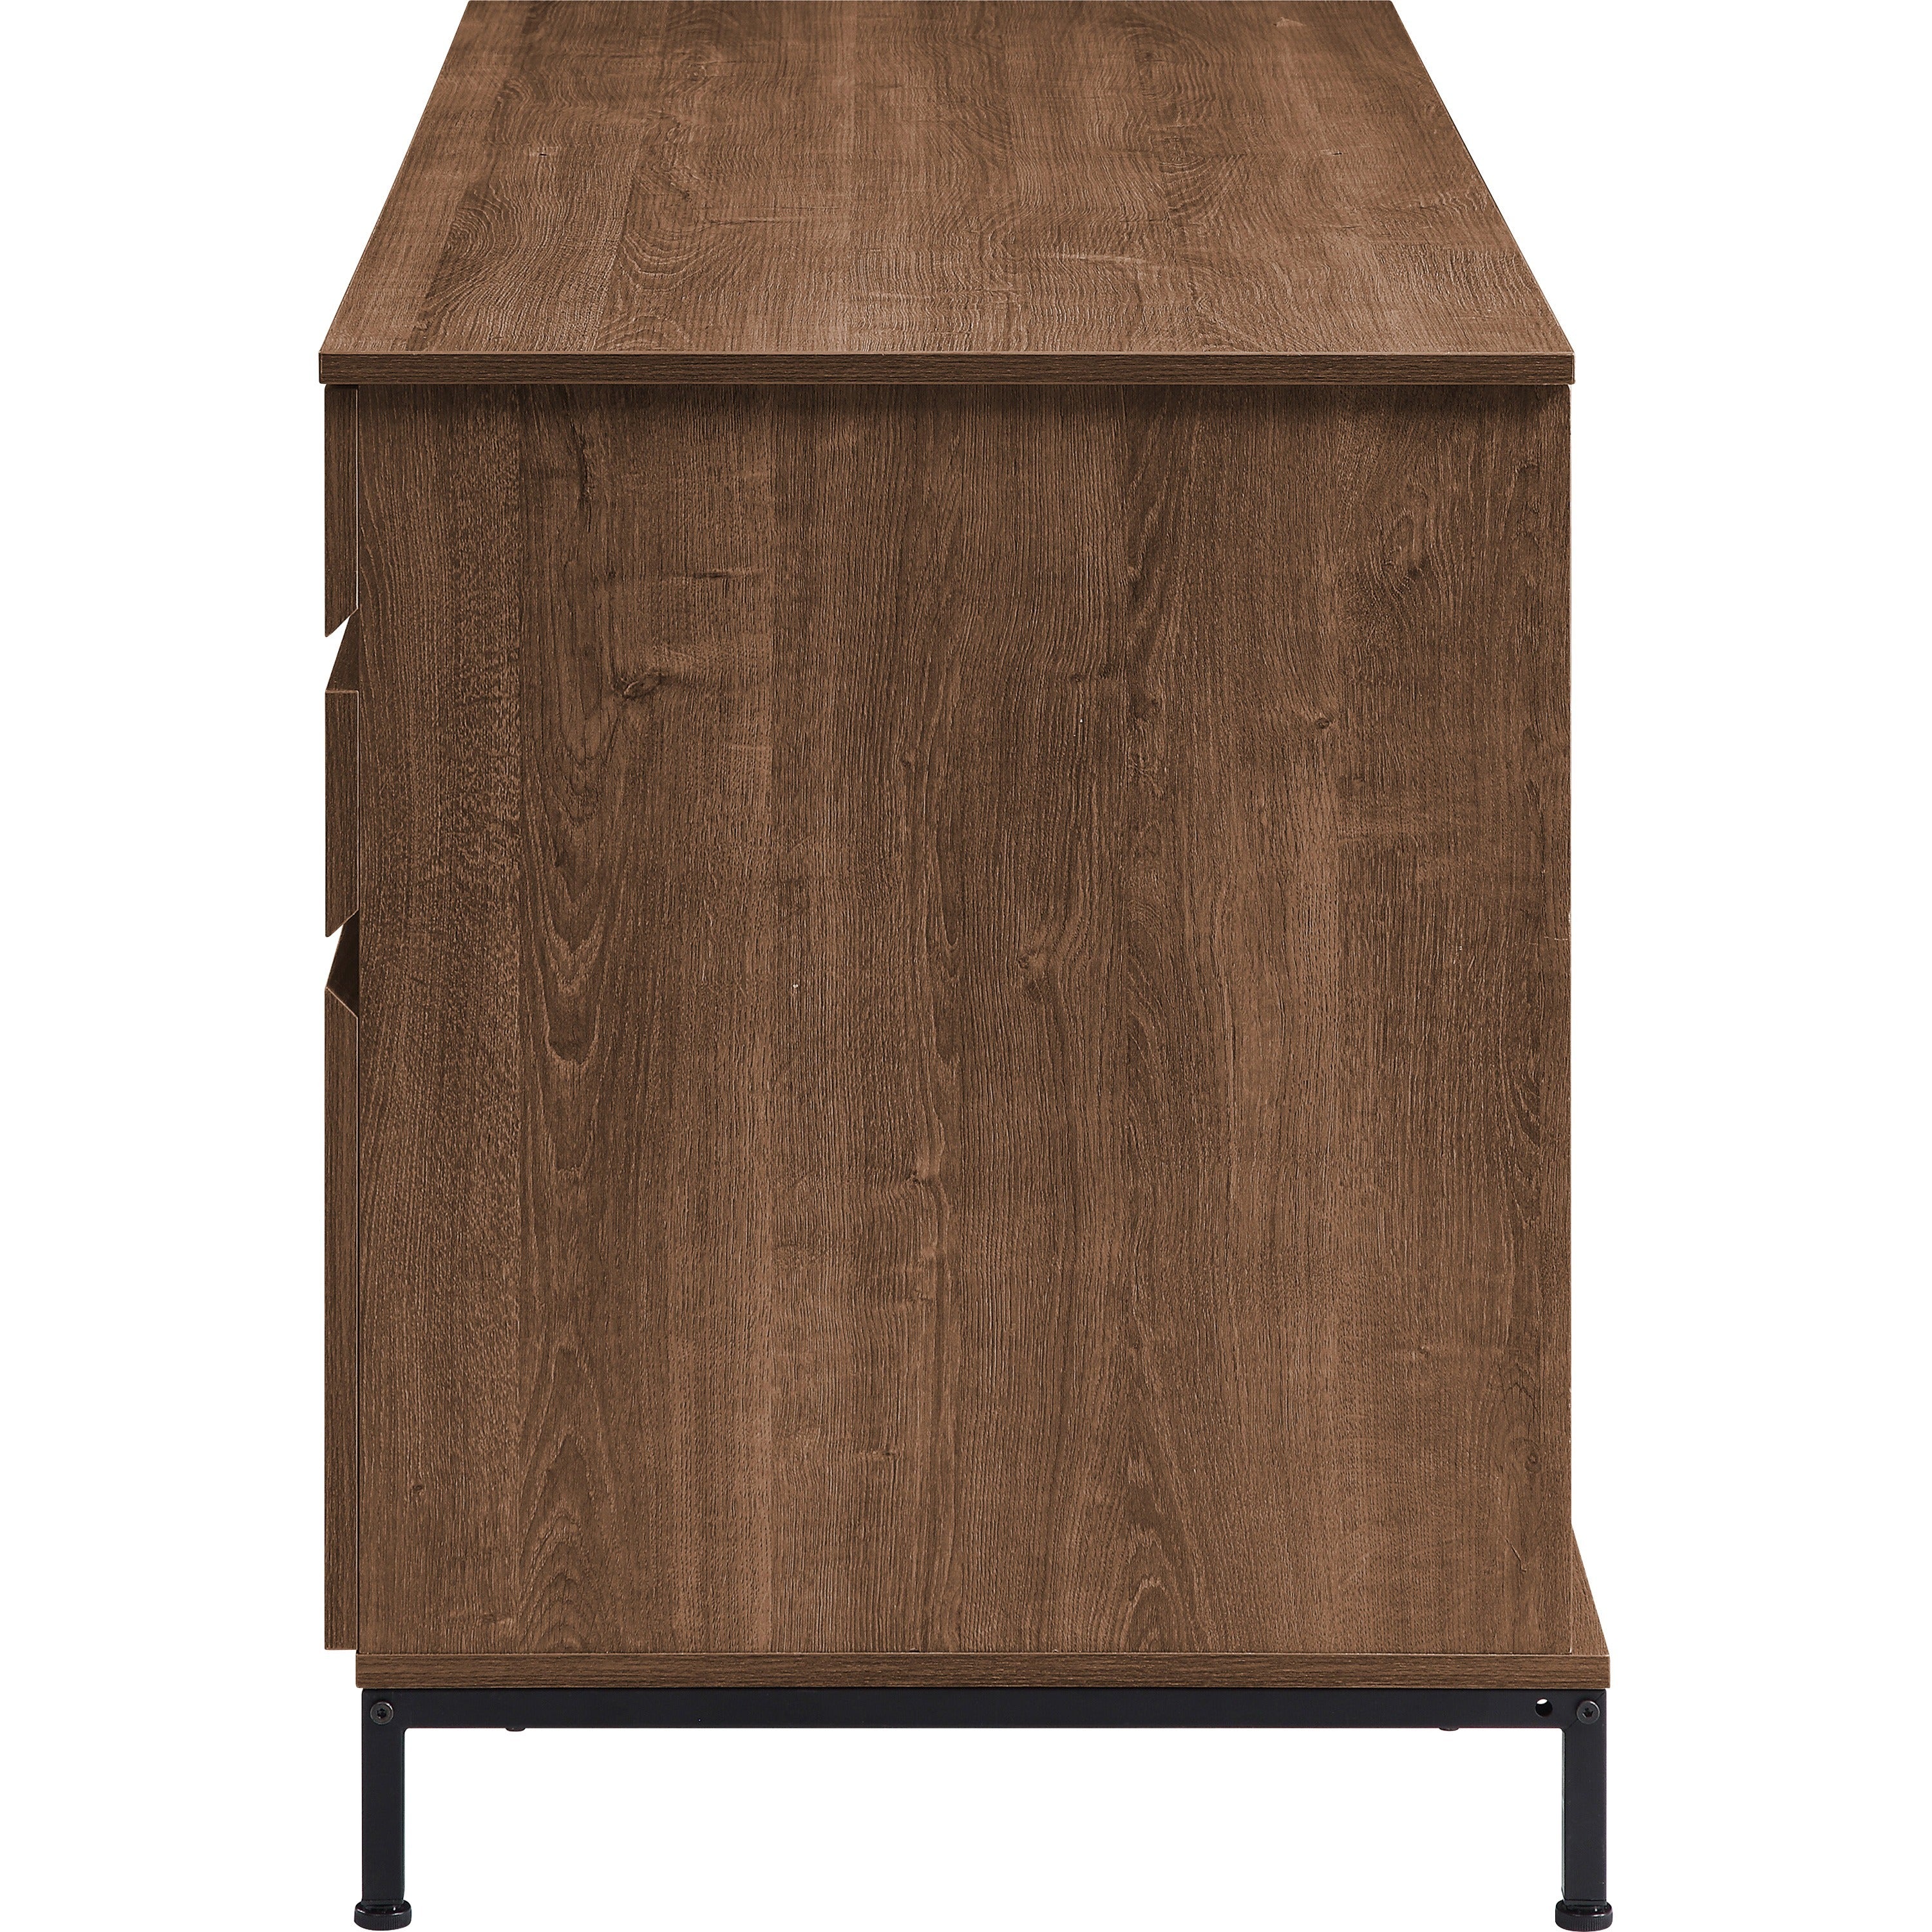 lorell-soho-desk-with-side-drawers-55-x-23630-3-x-file-drawers-single-pedestal-on-right-side-finish-walnut_llr97615 - 5